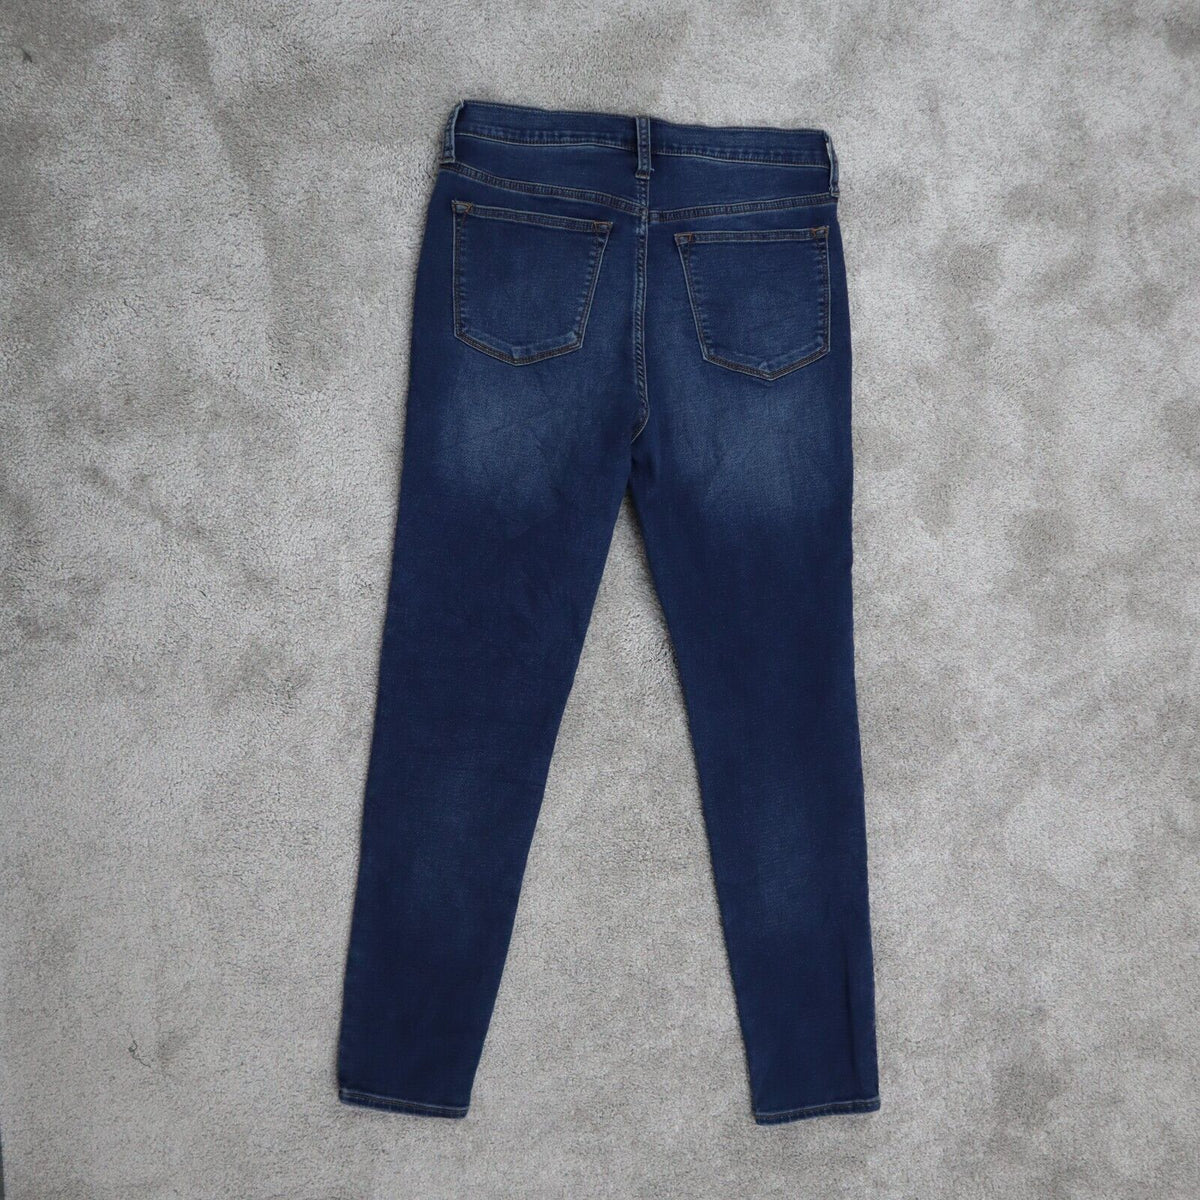 5 Types of Vintage Jeans to Thrift – Goodfair